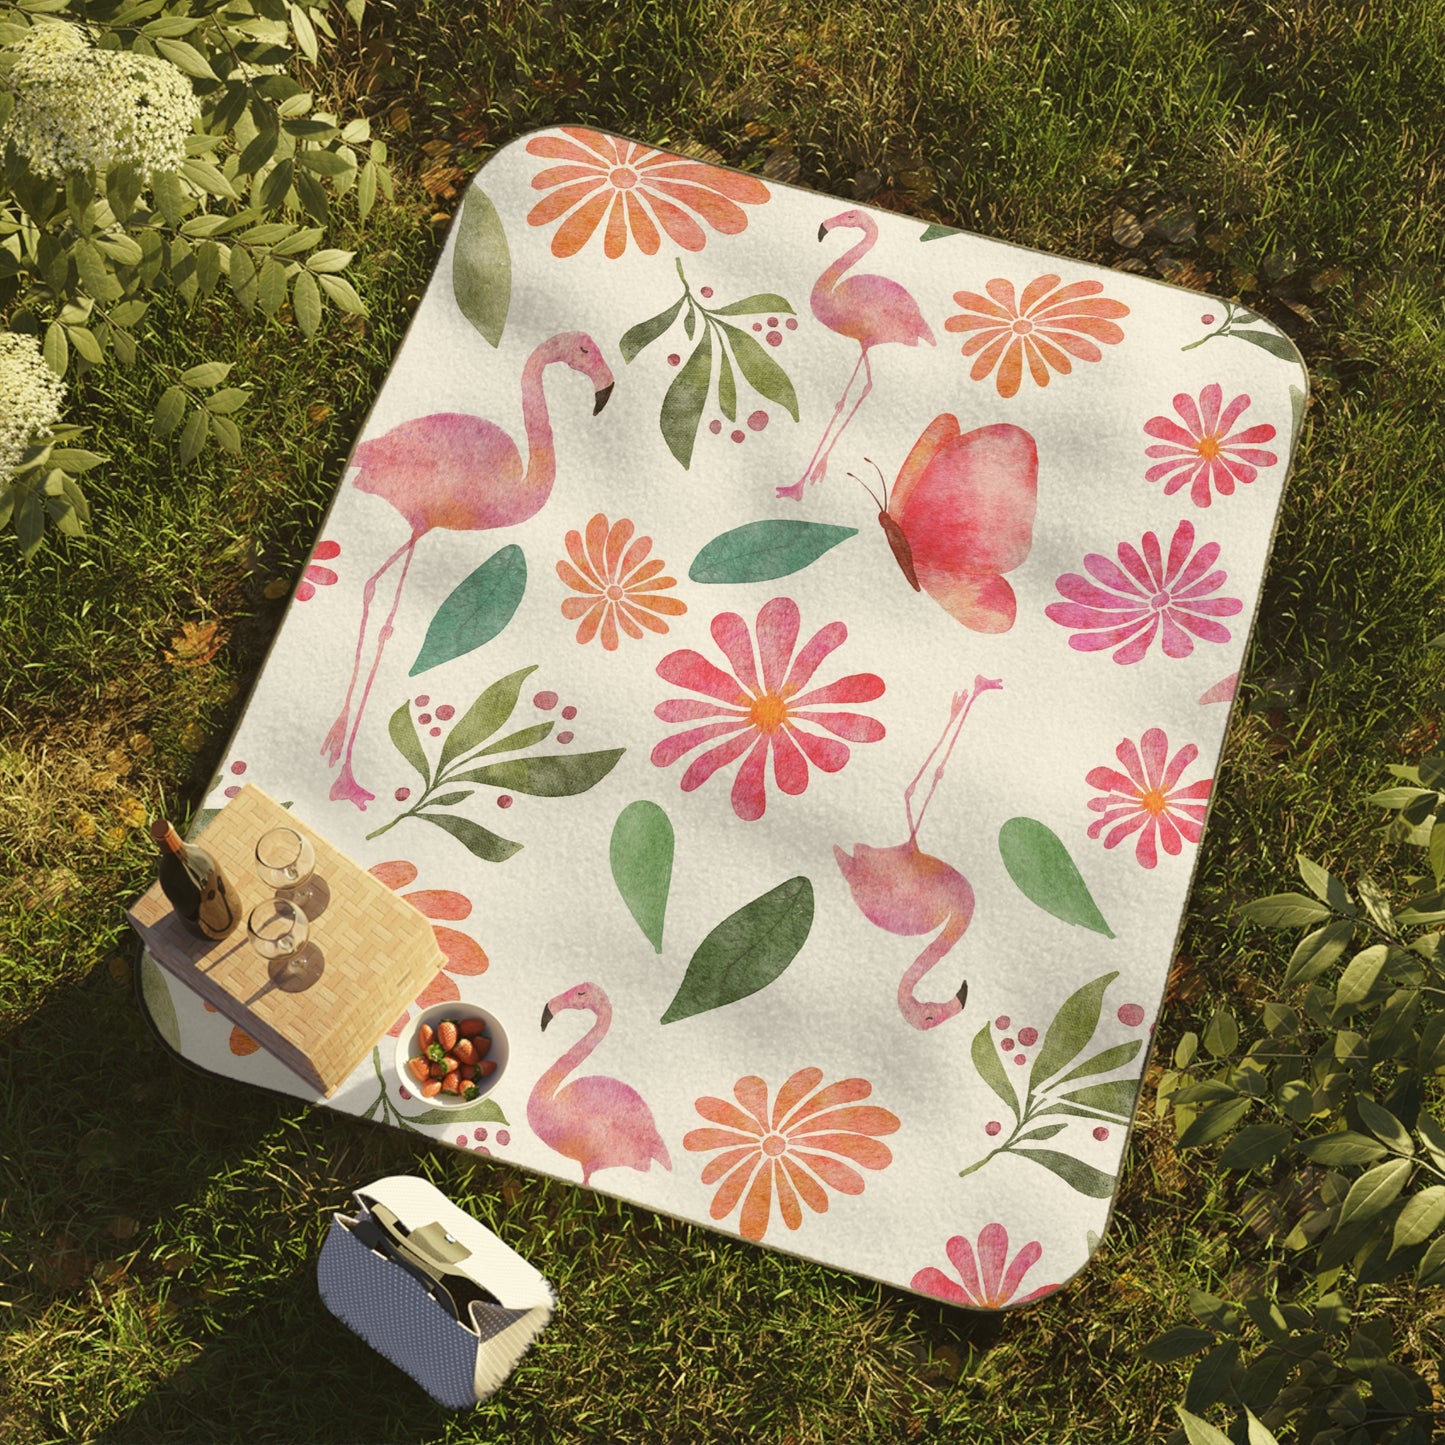 Flamingoes Flowers and Butterflies Picnic Blanket